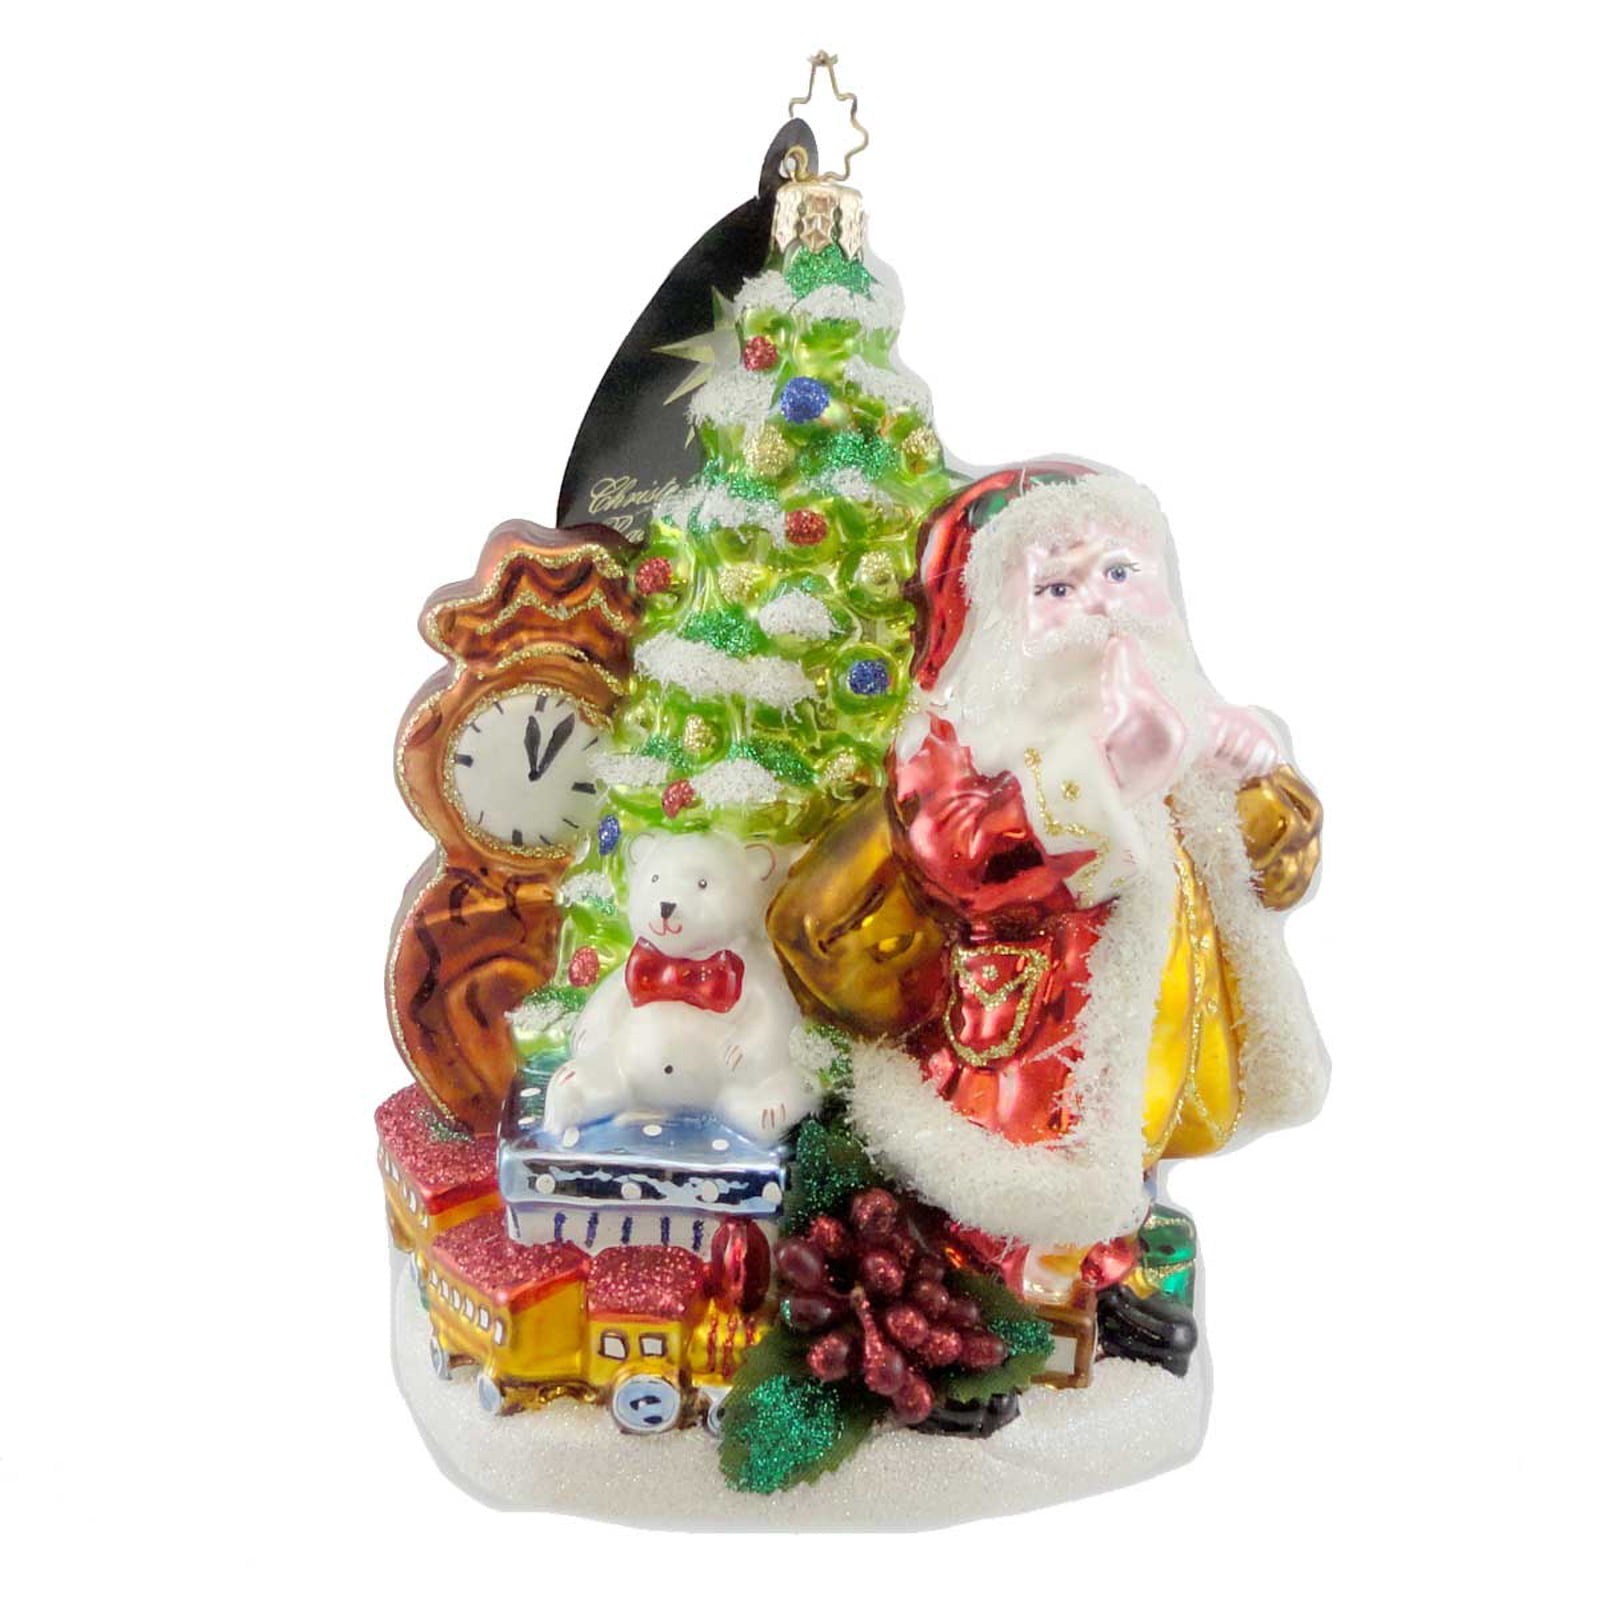 Asleep in The Manger! Christopher Radko Hand-Crafted European Glass Christmas Decorative Figural Ornament